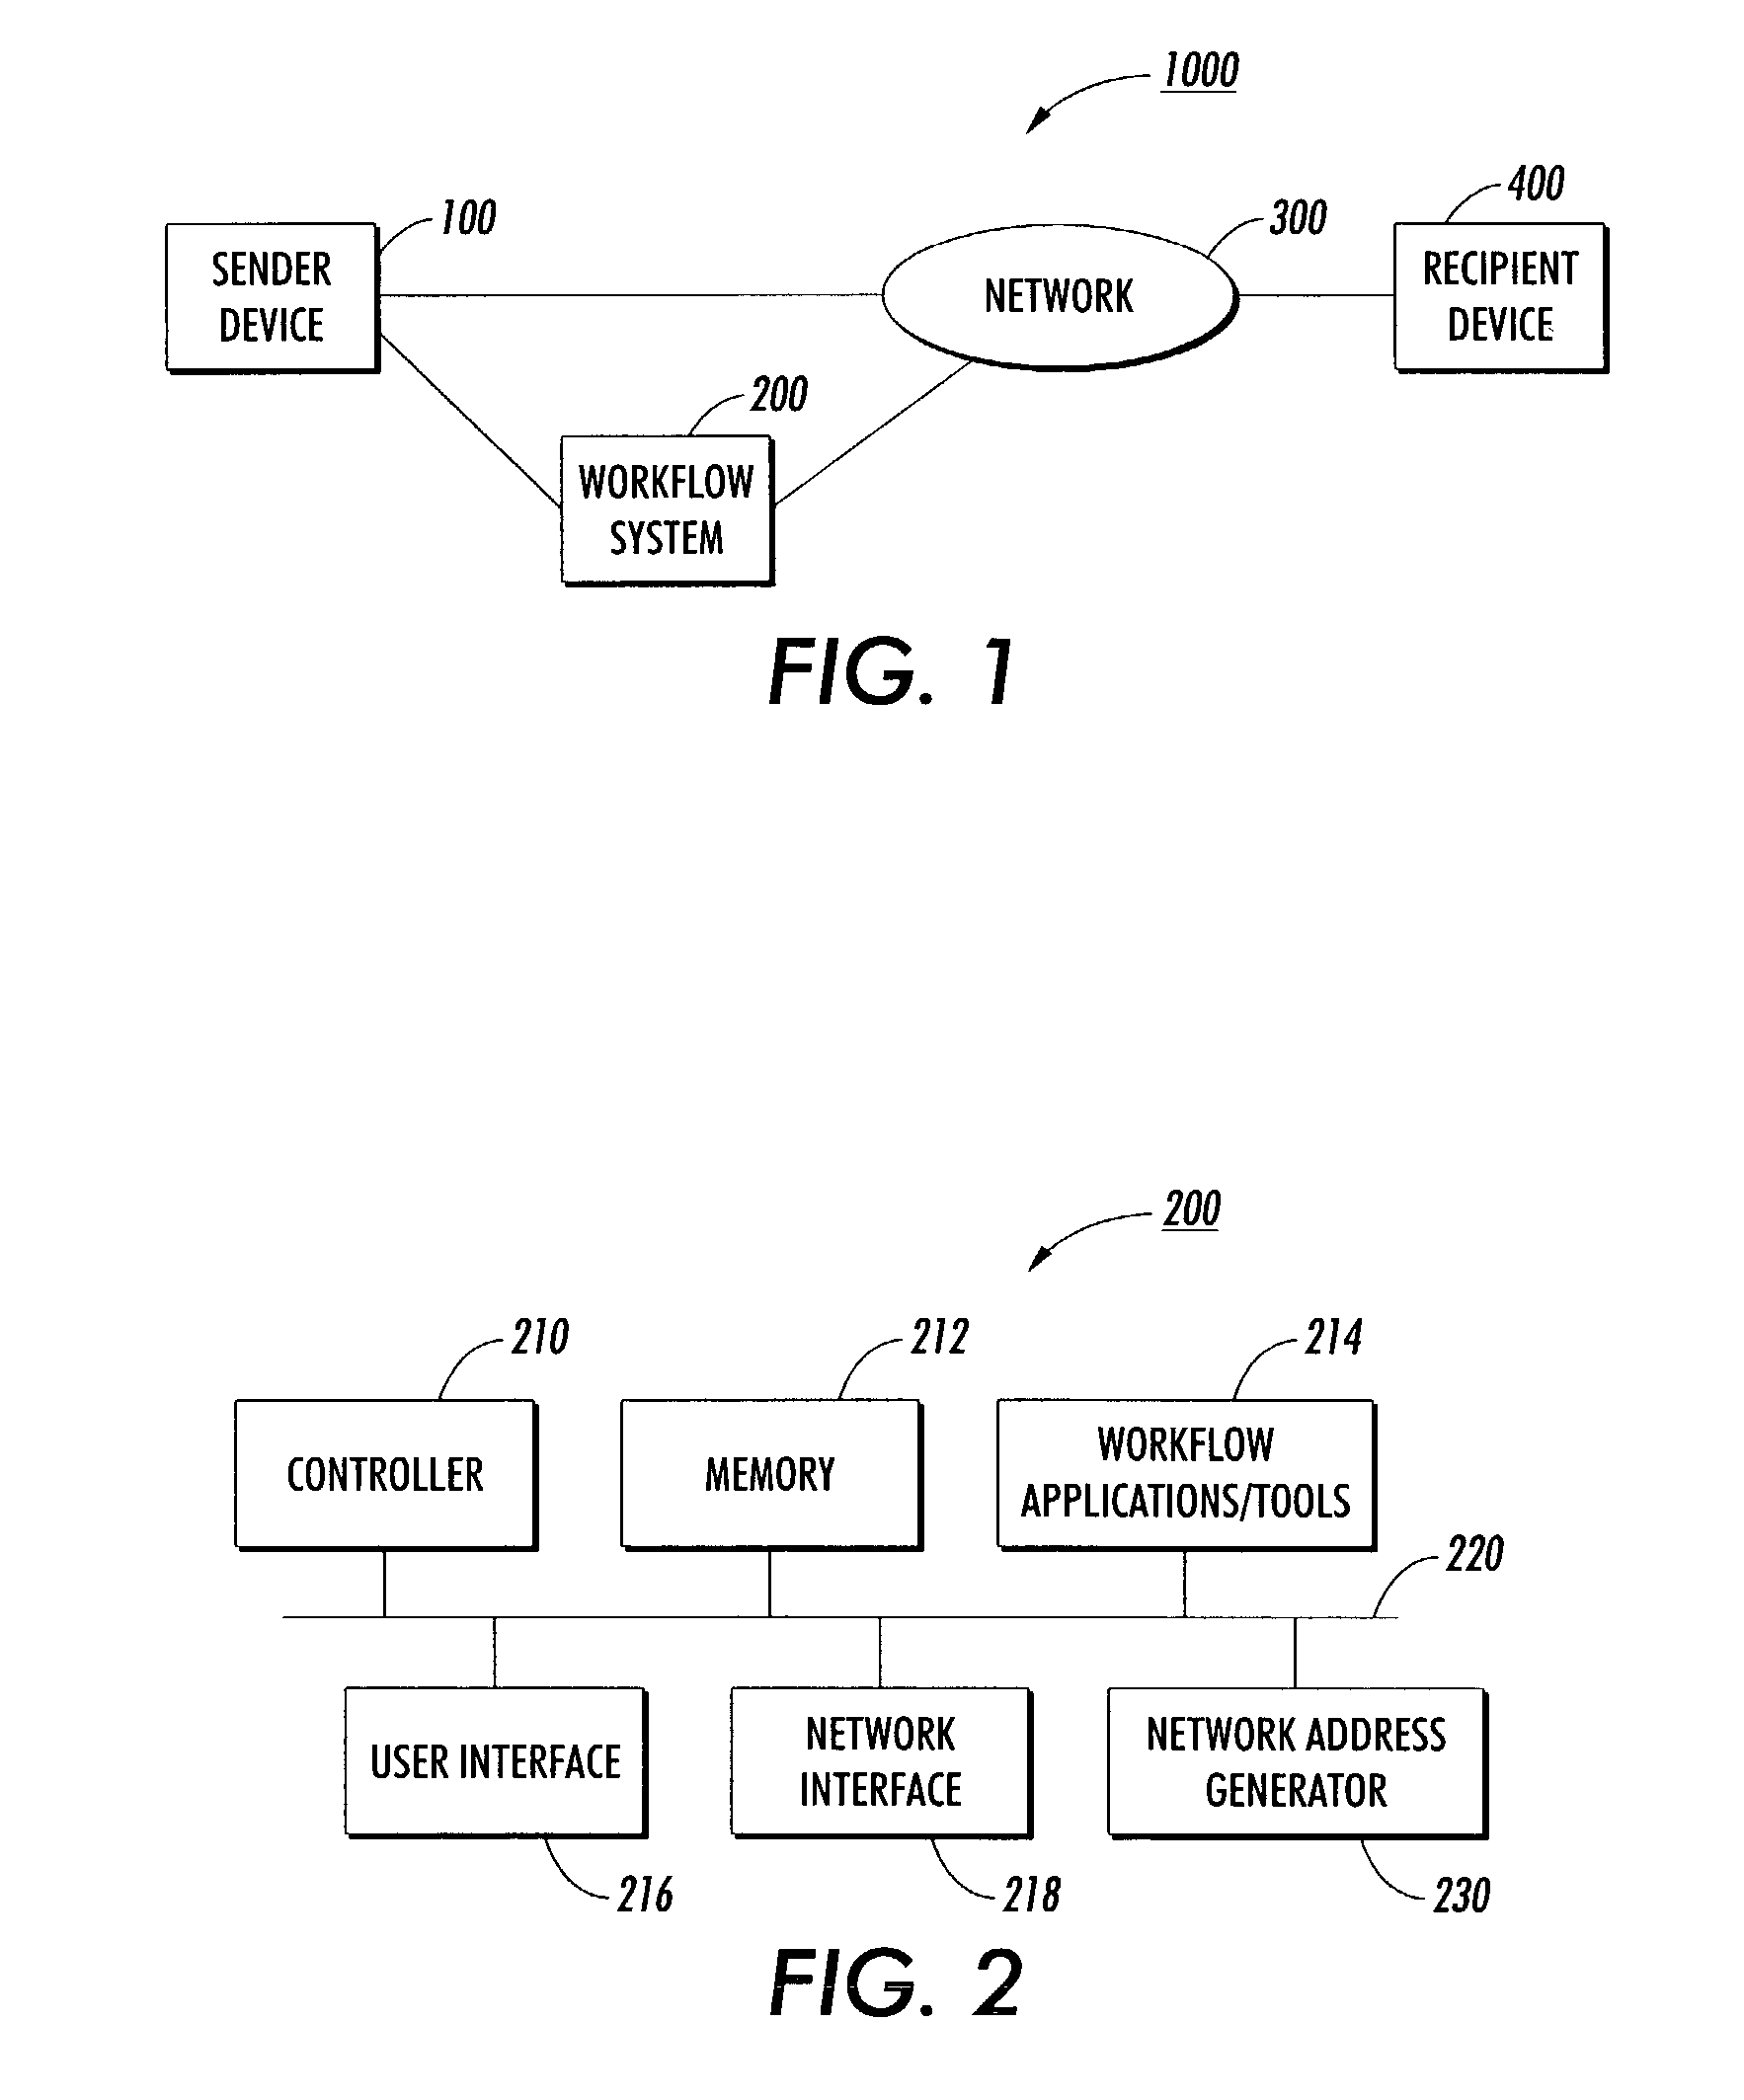 Systems and methods for integrating electronic mail and distributed networks into a workflow system